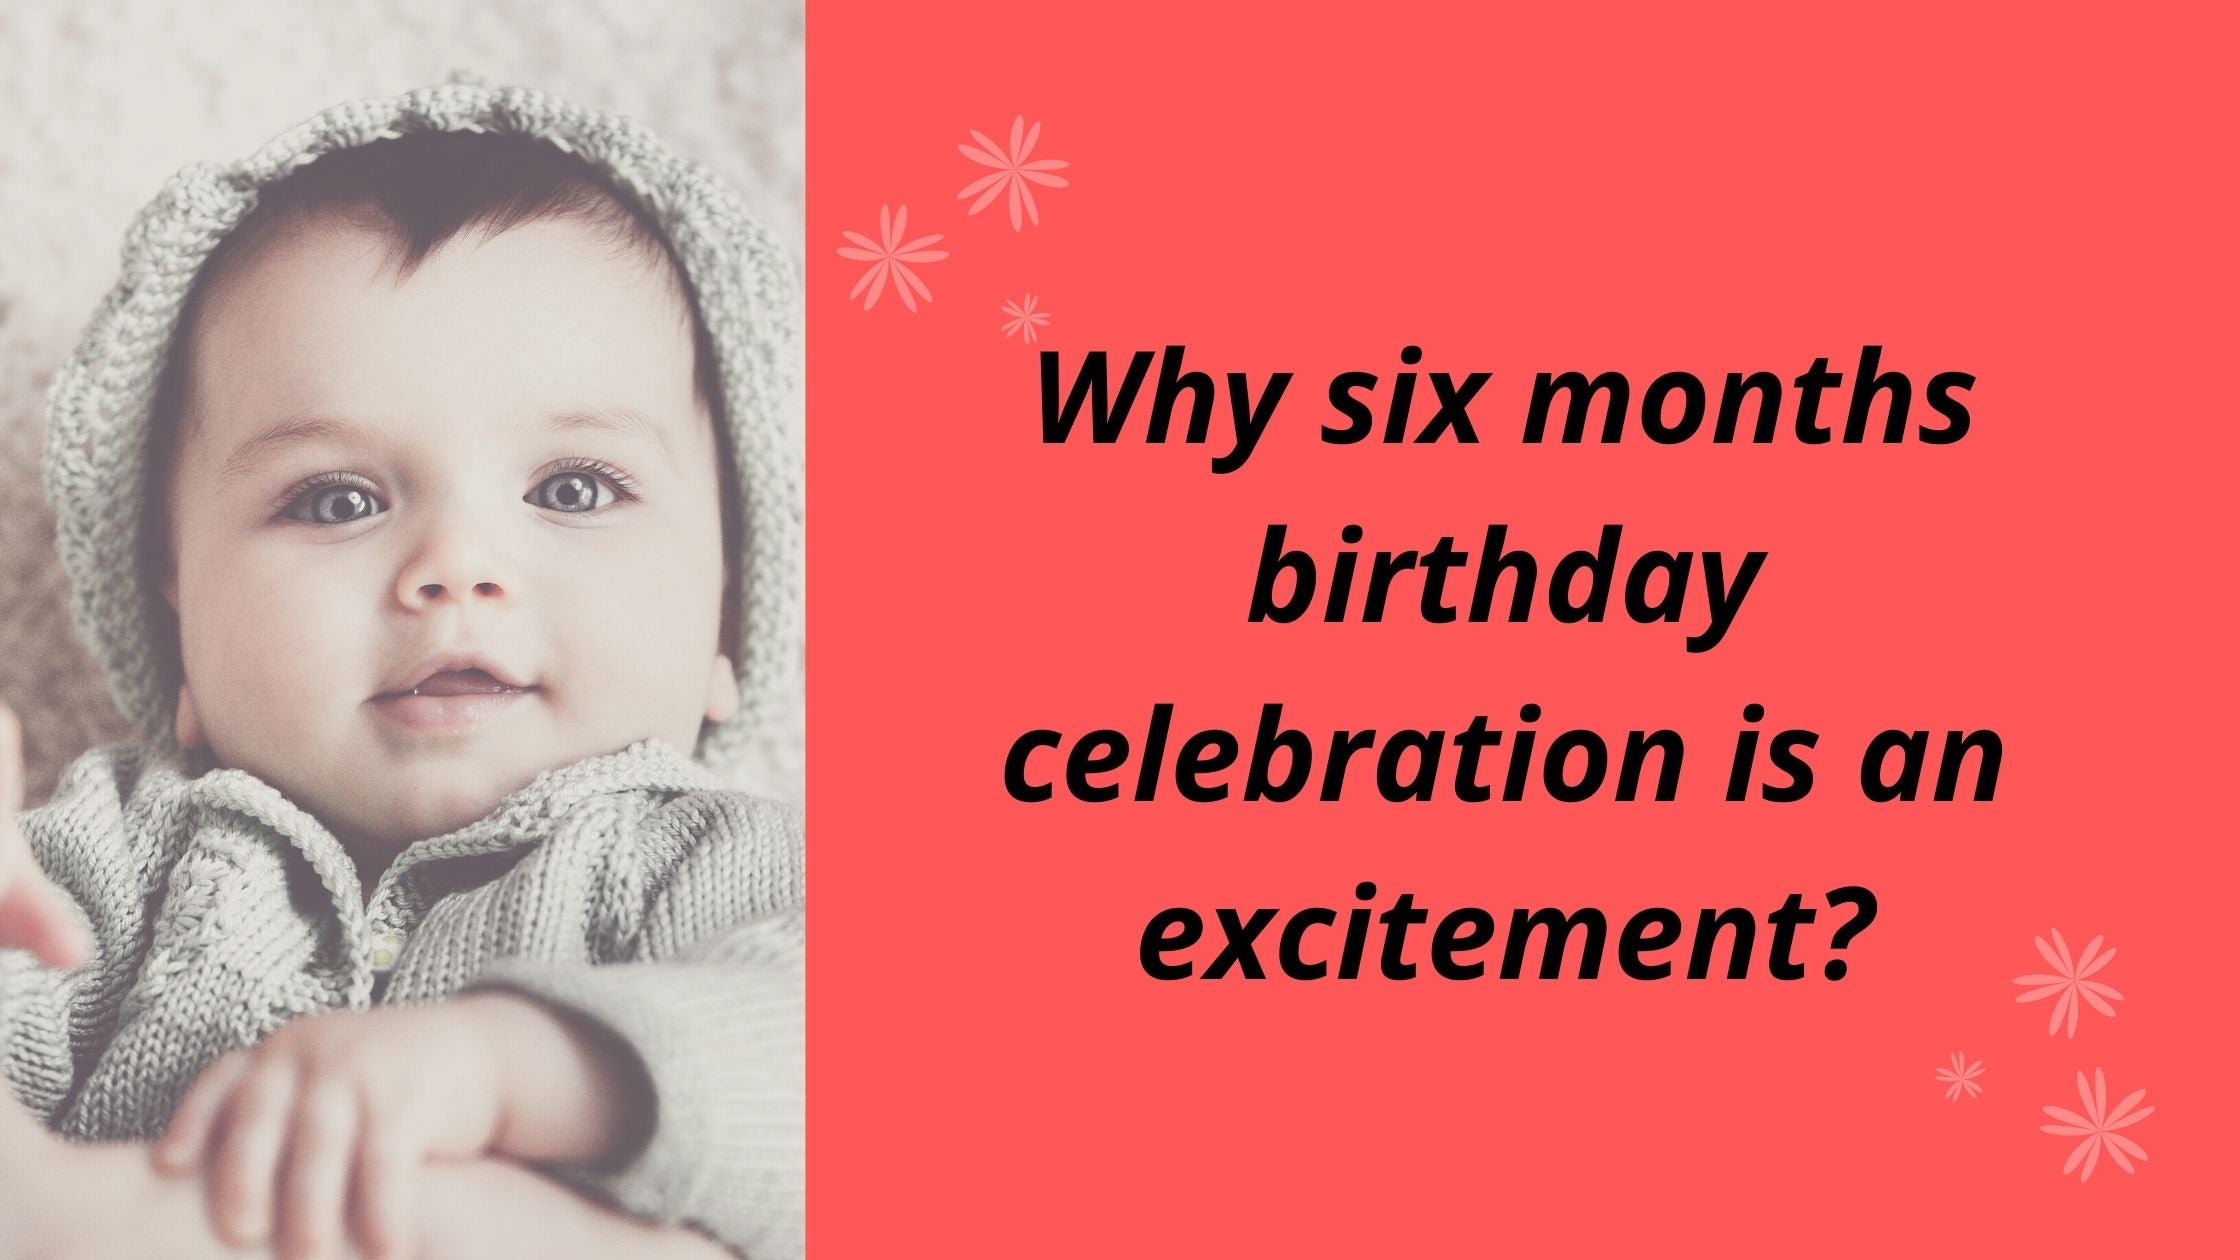 Why six months birthday celebration is an excitement?